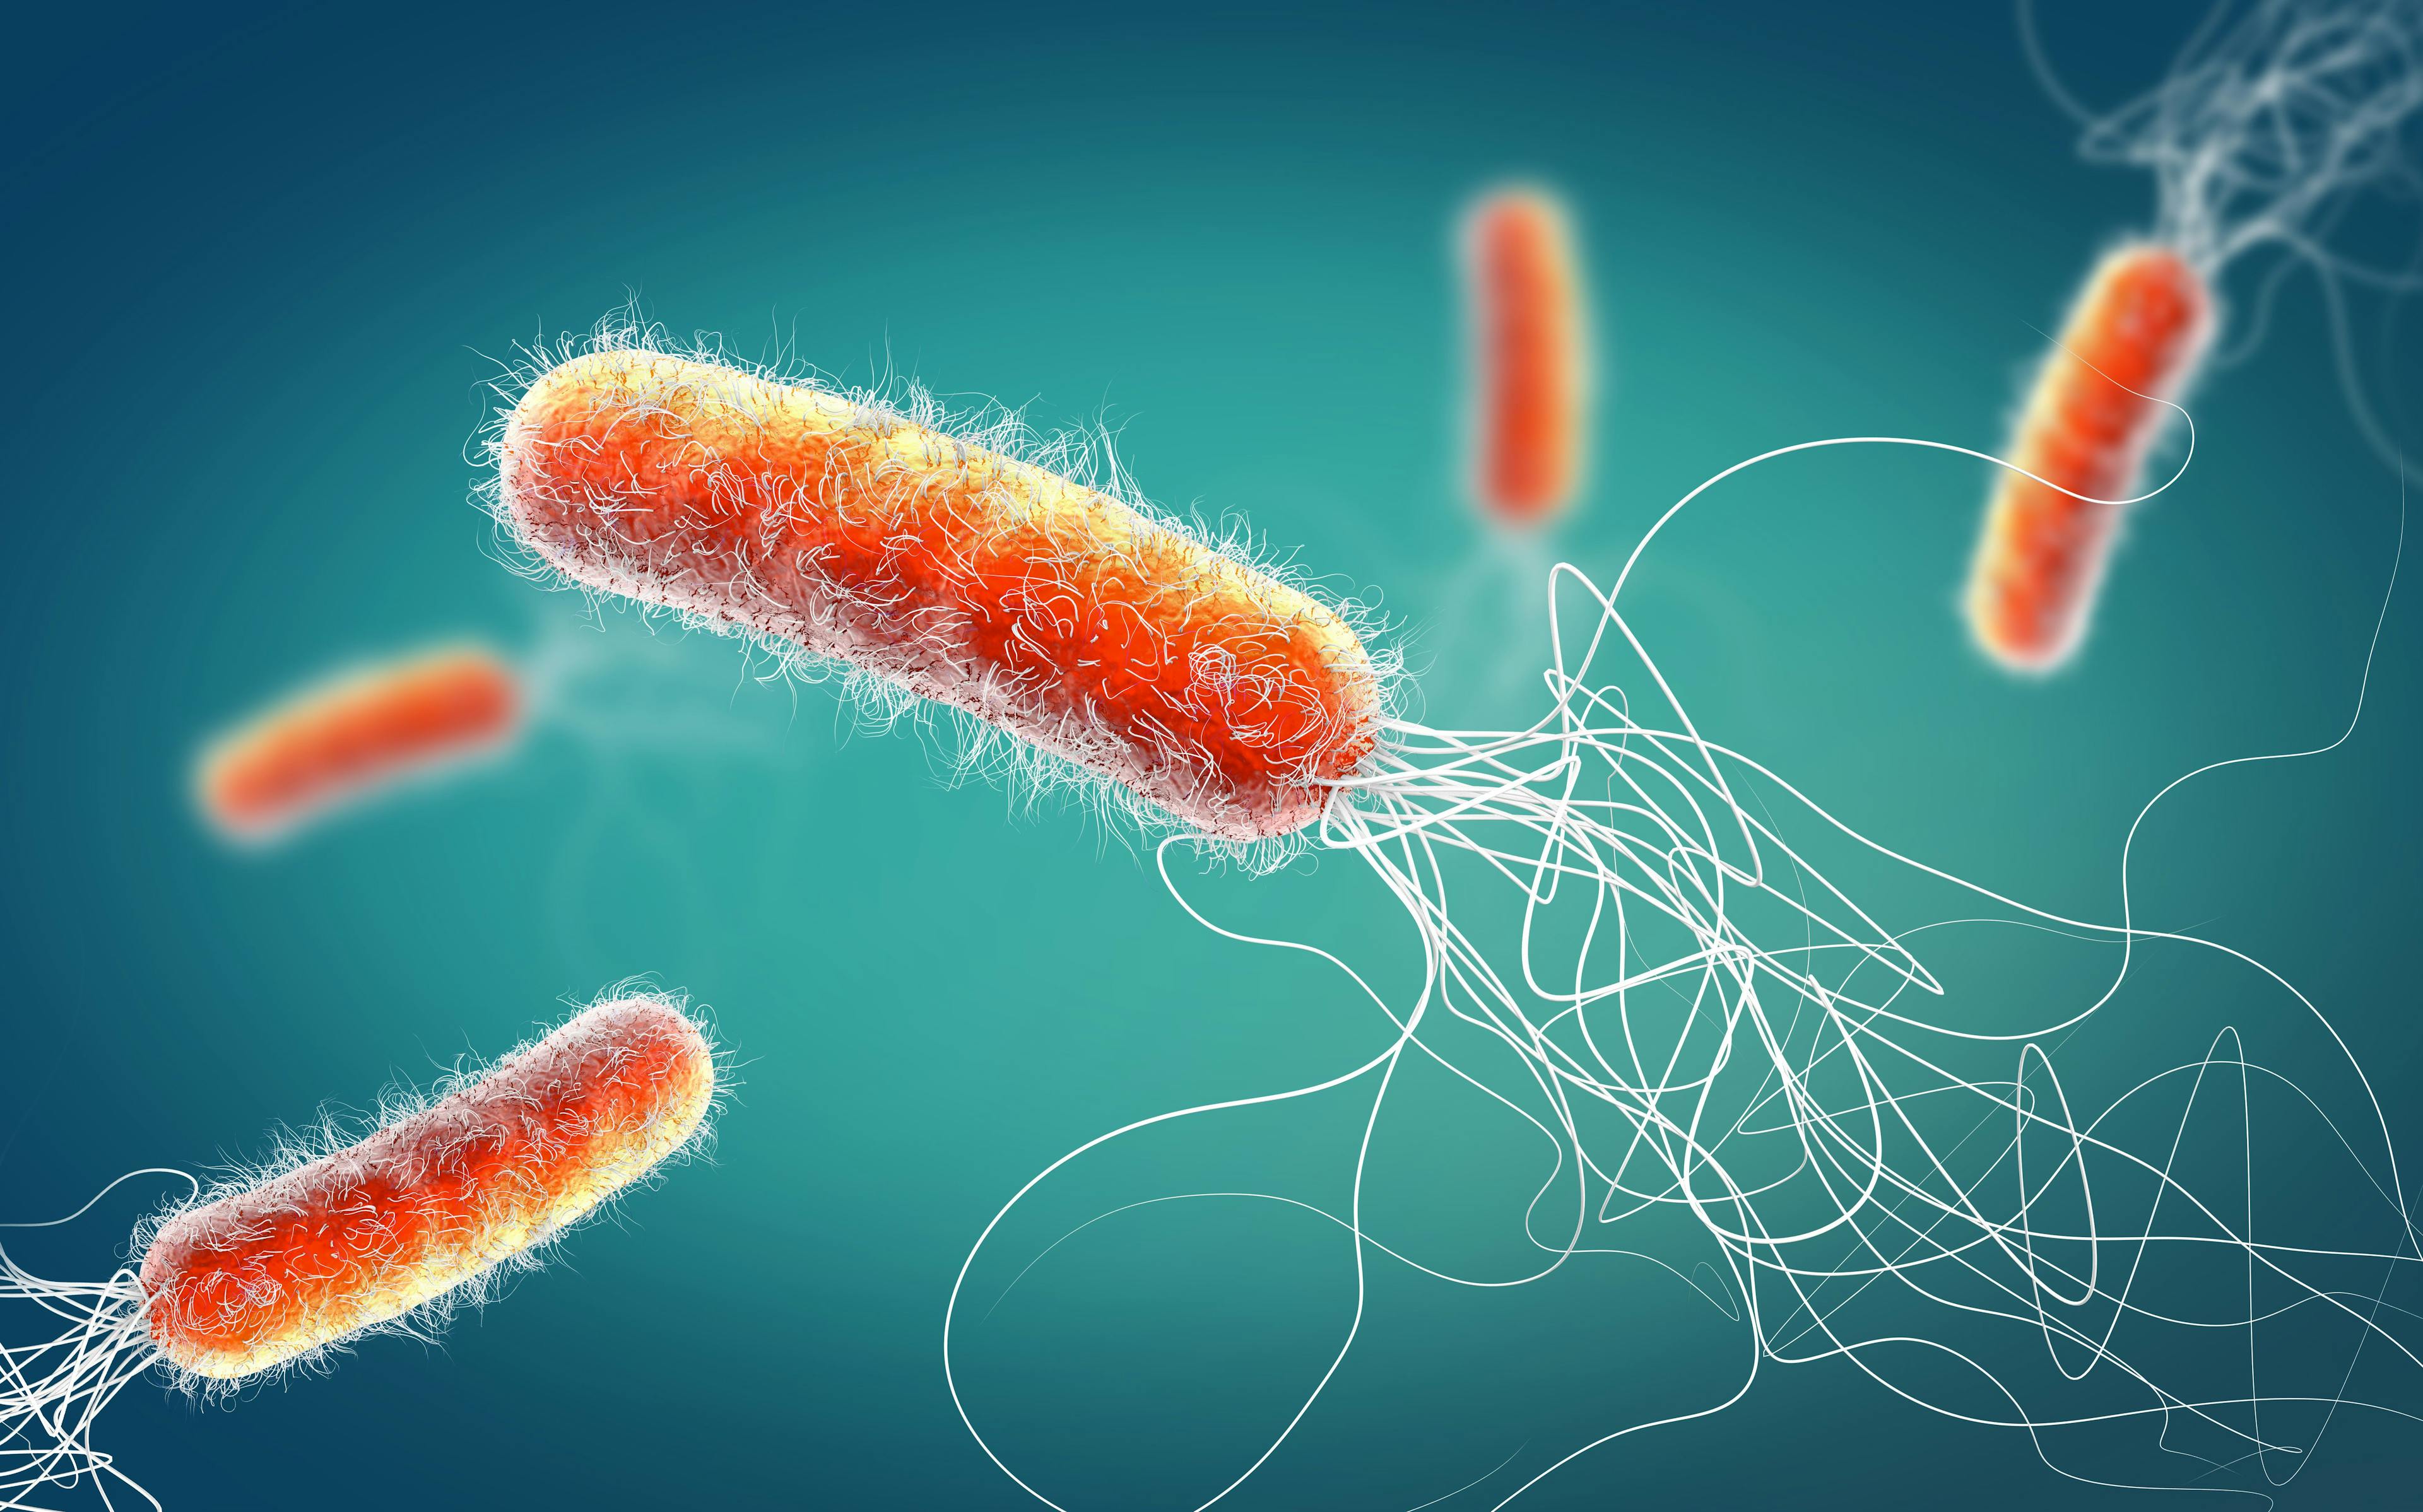 Clinical Development Program Shows Promise for Microbiome-Based Therapeutics in Recurrent C. Diff